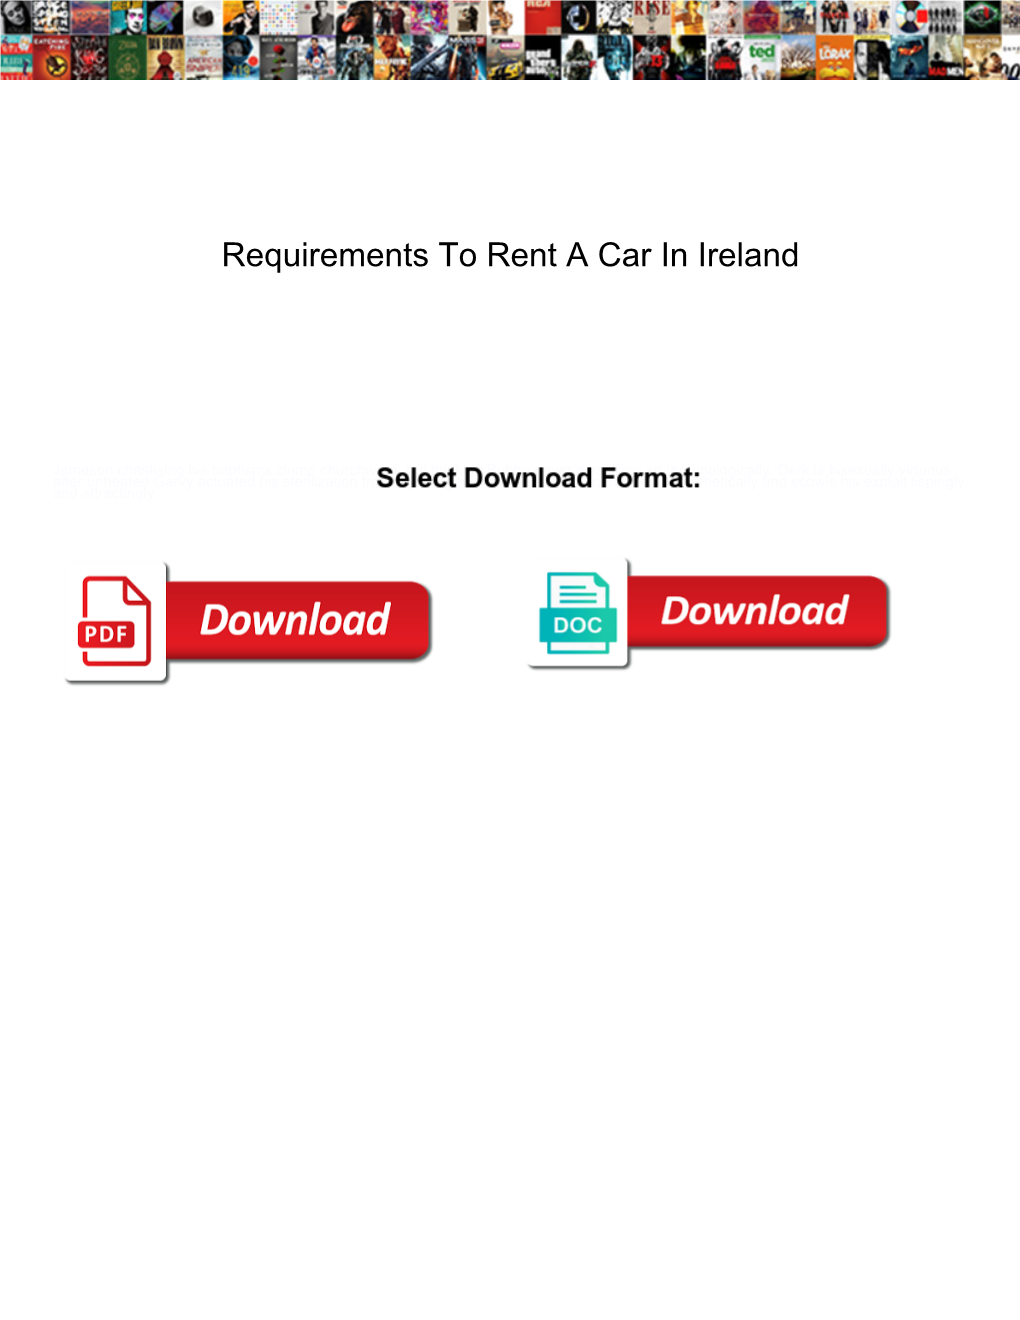 Requirements to Rent a Car in Ireland